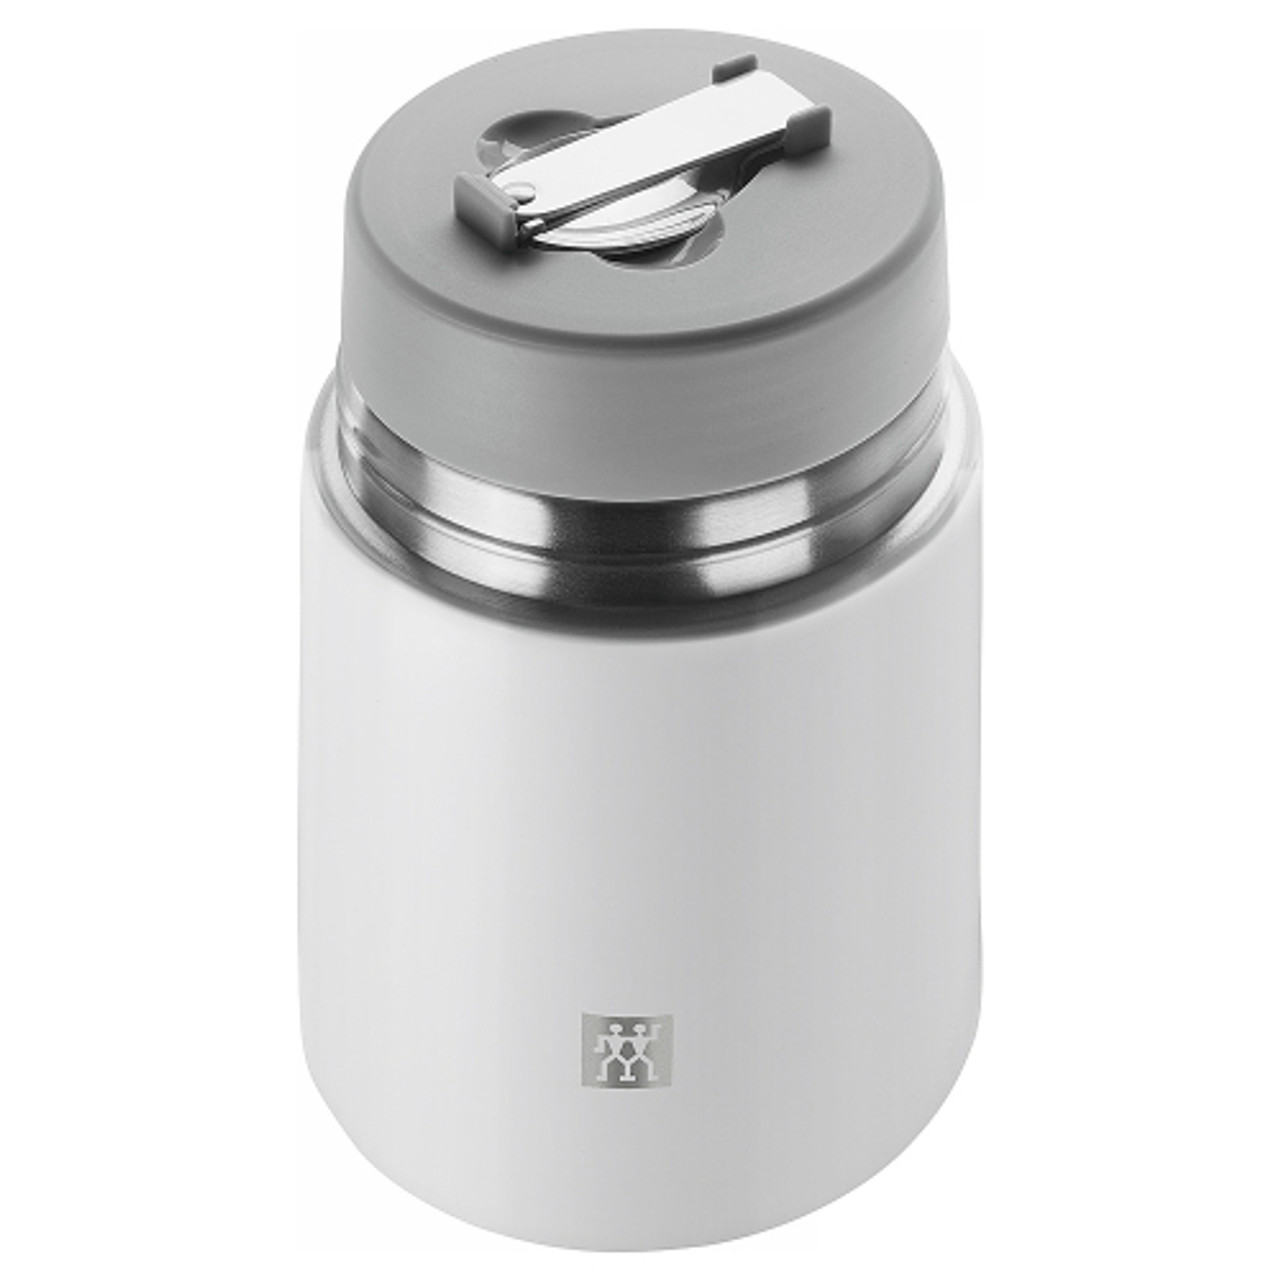 ZWILLING Thermo 23.6 oz Food Jar - Silver-White - Silver